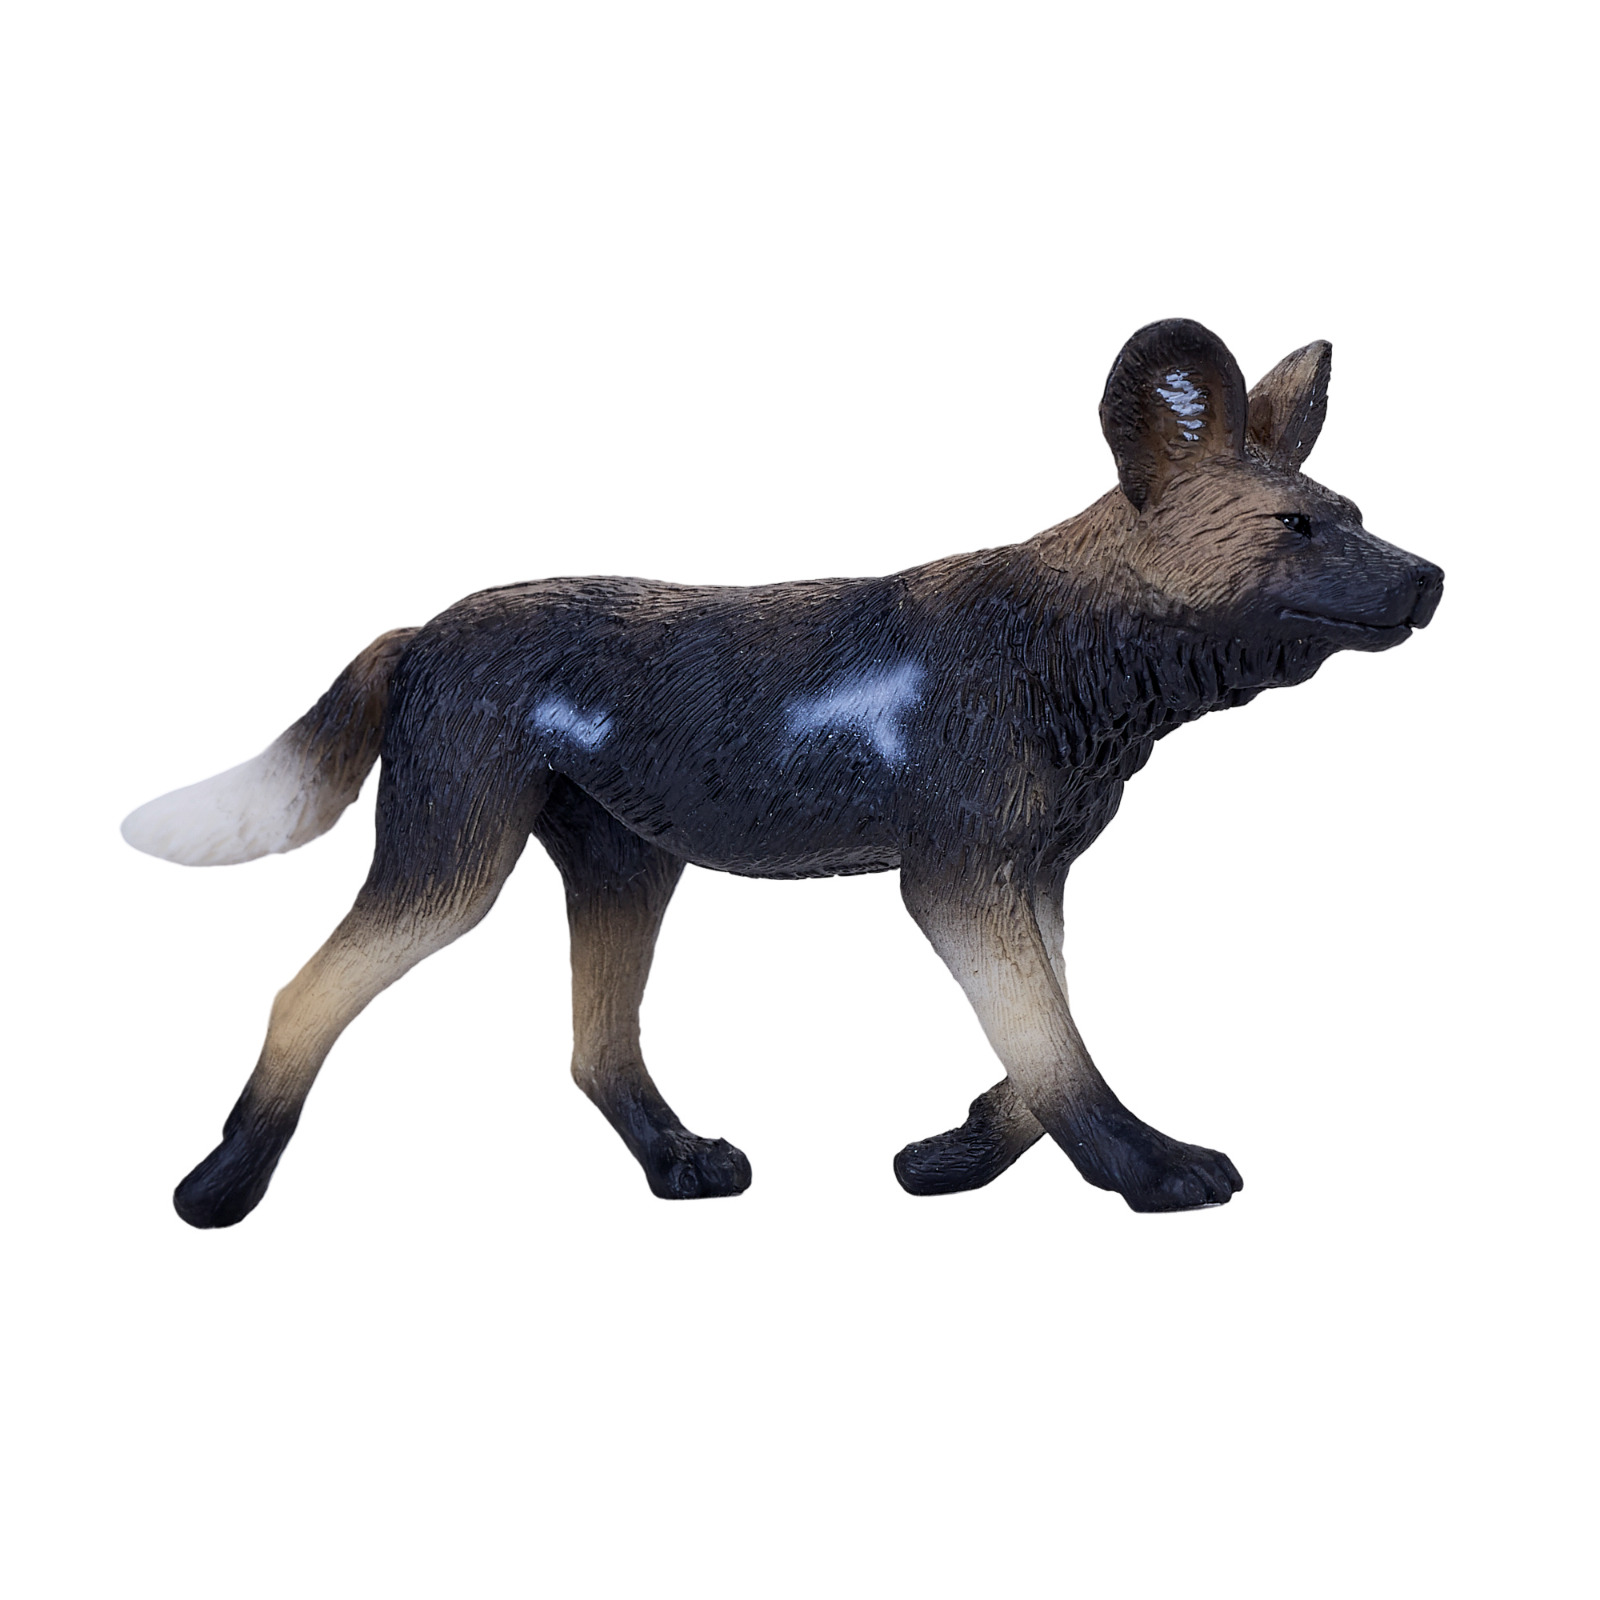 .Mojo AFRICAN PAINTED DOG Wild zoo animals play model figure toy plastic forest